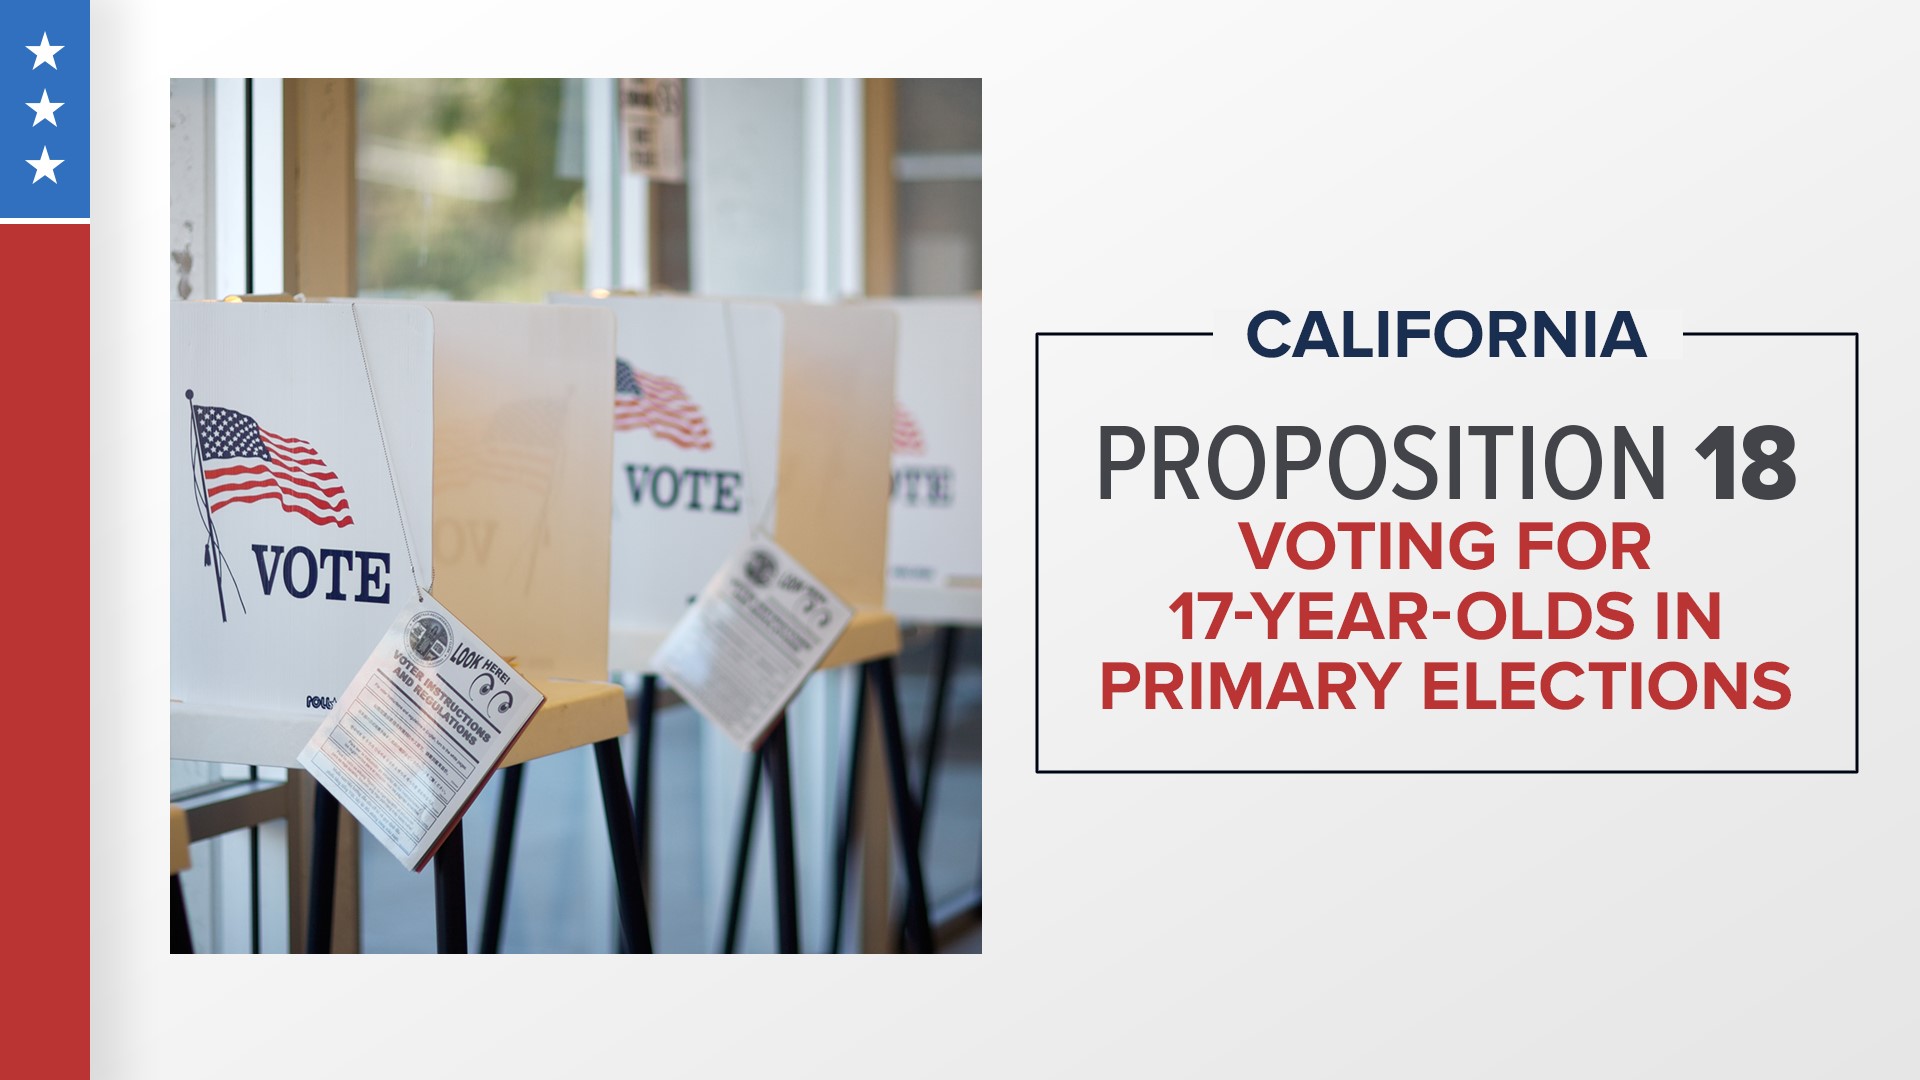 Proposition 18 is an amendment to the constitution to allow a 17-year-old to vote in a primary election as long as they will turn 18 by the general election.